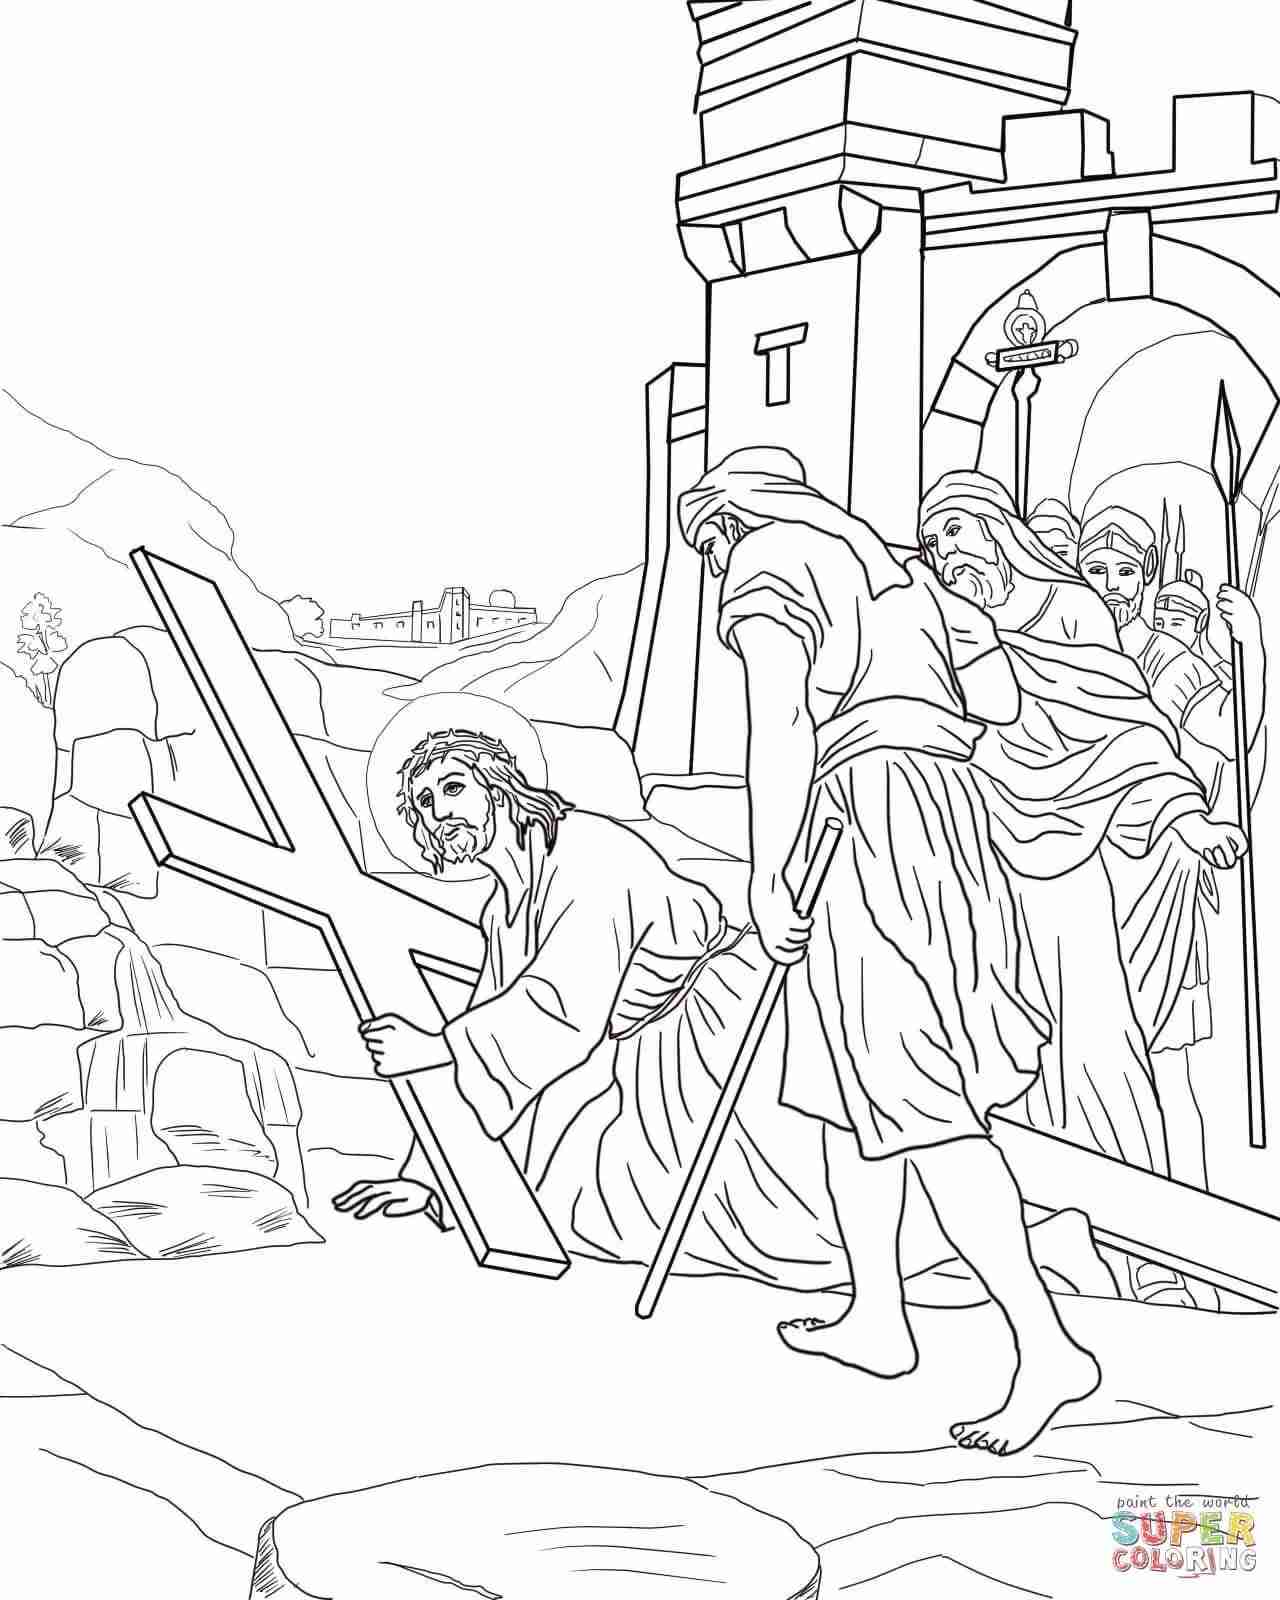 Holy Thursday Coloring Pages at Free